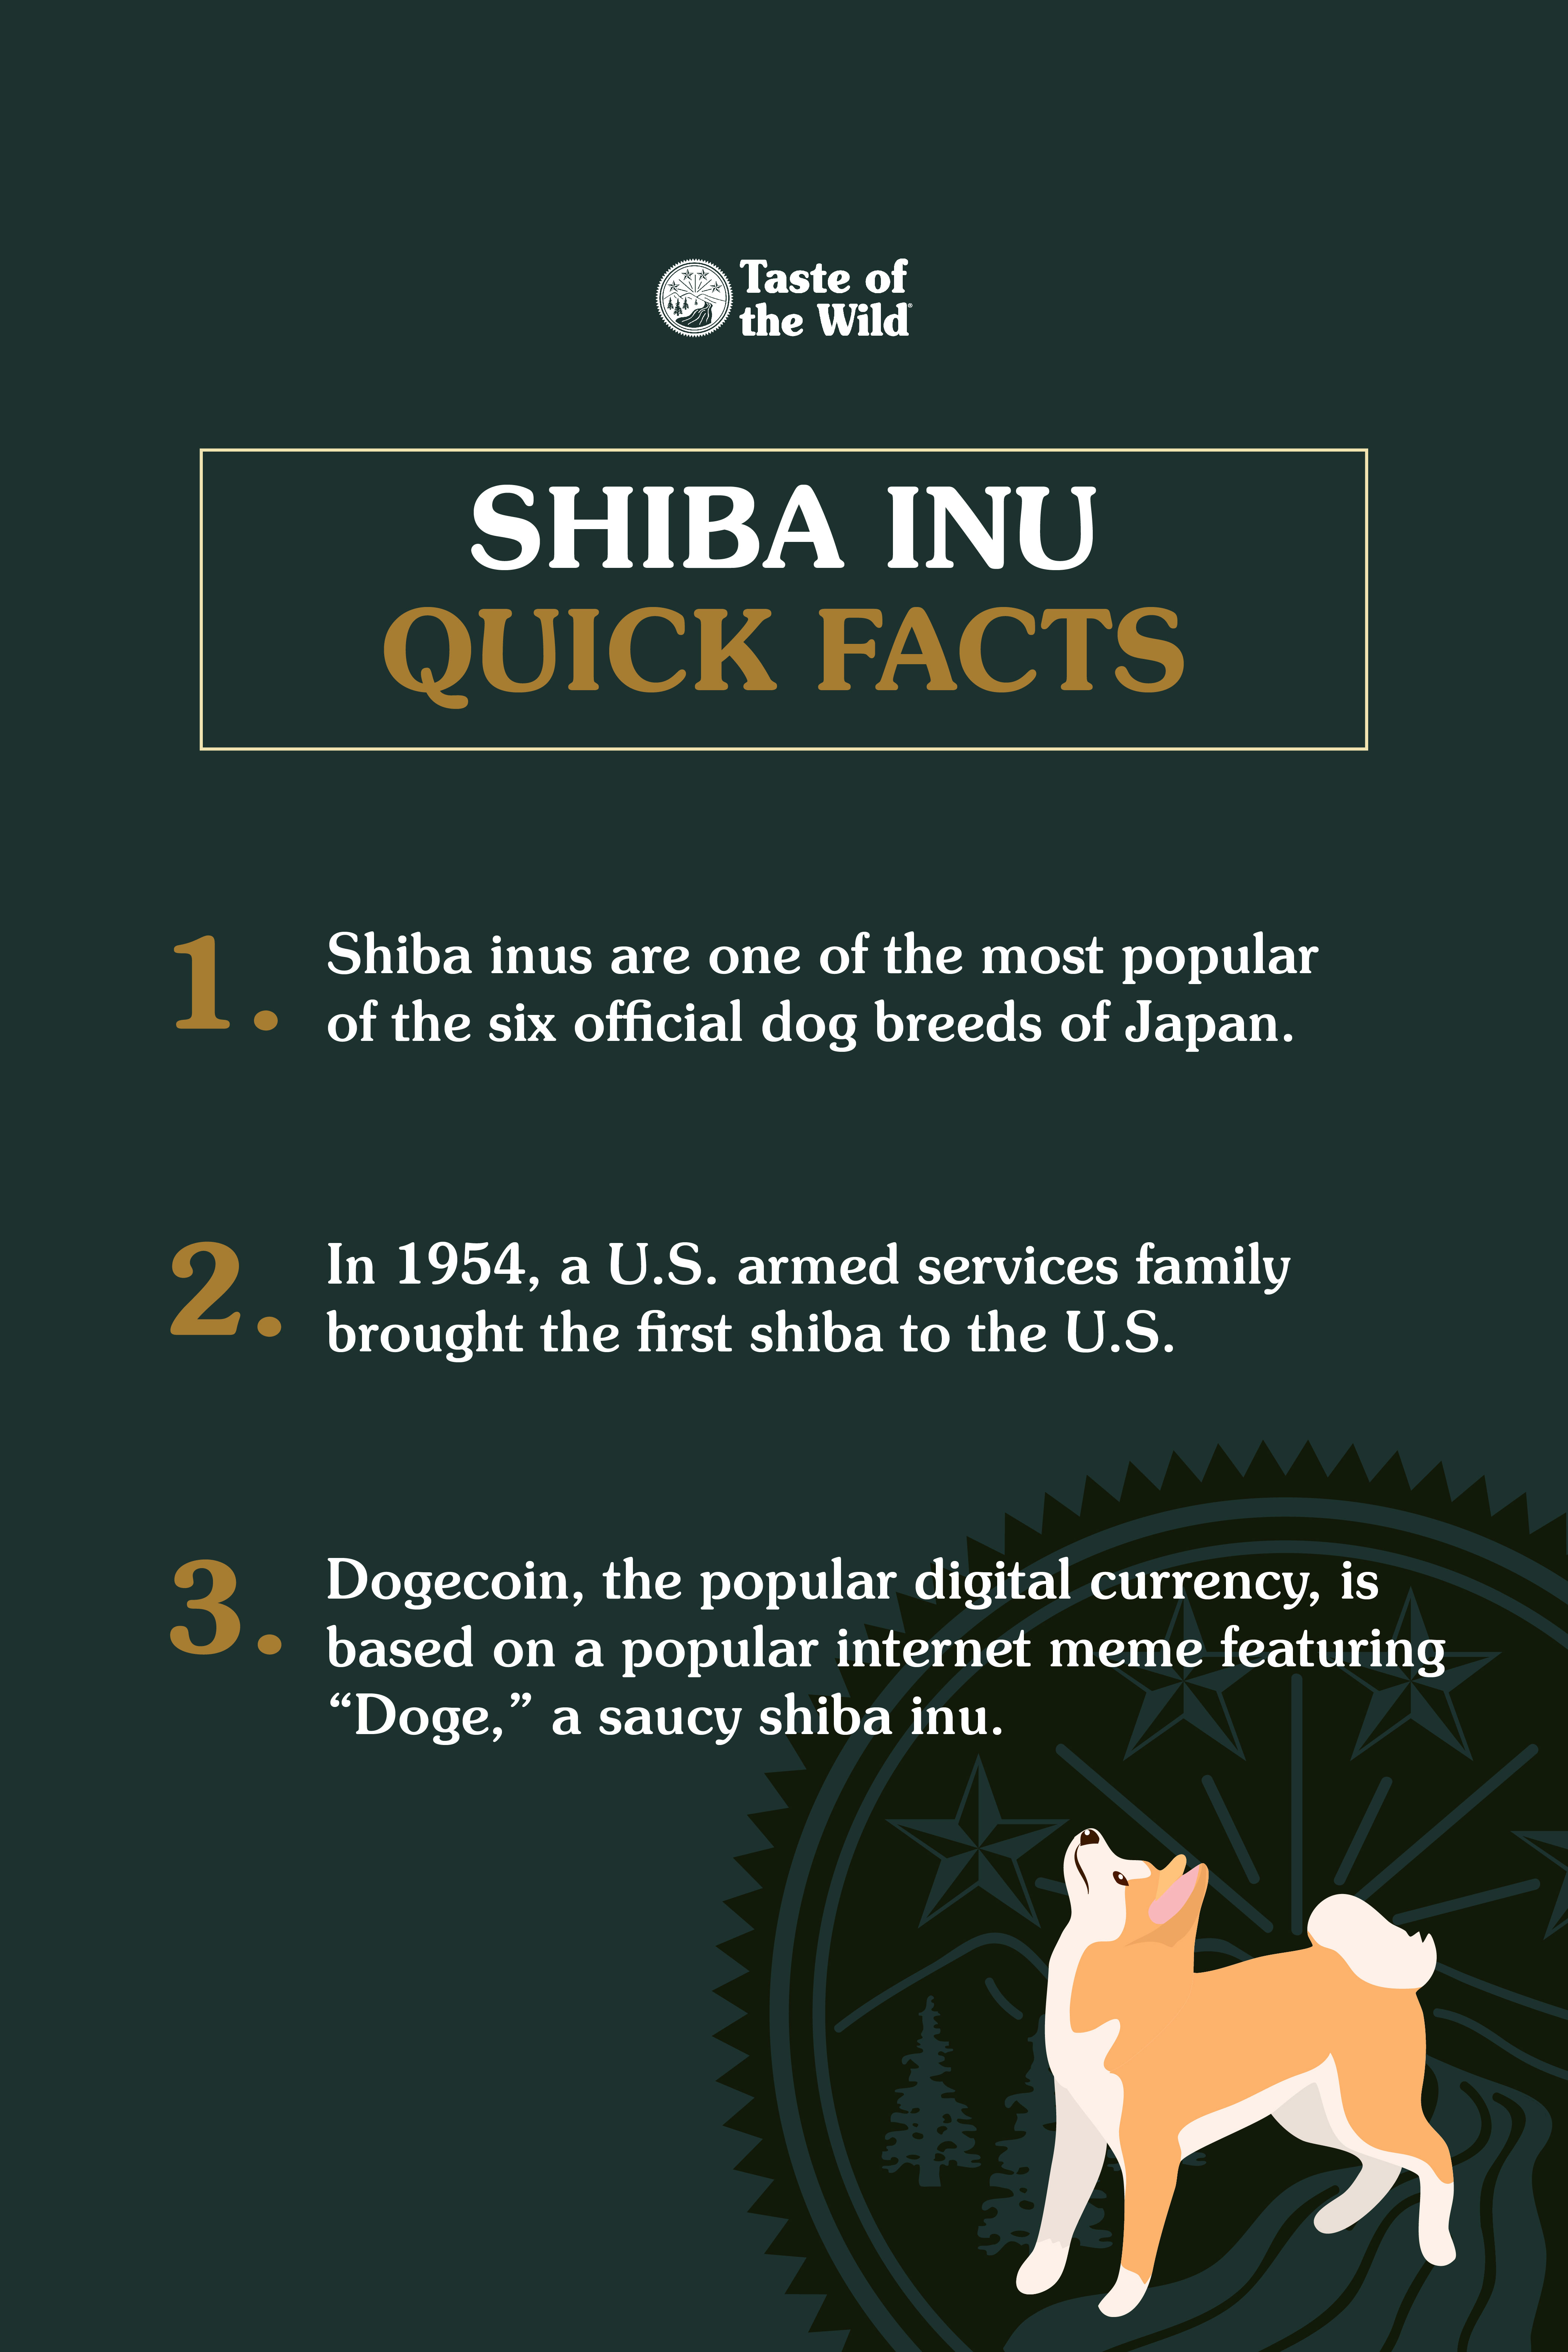 Shiba inu quick facts. | Taste of the Wild